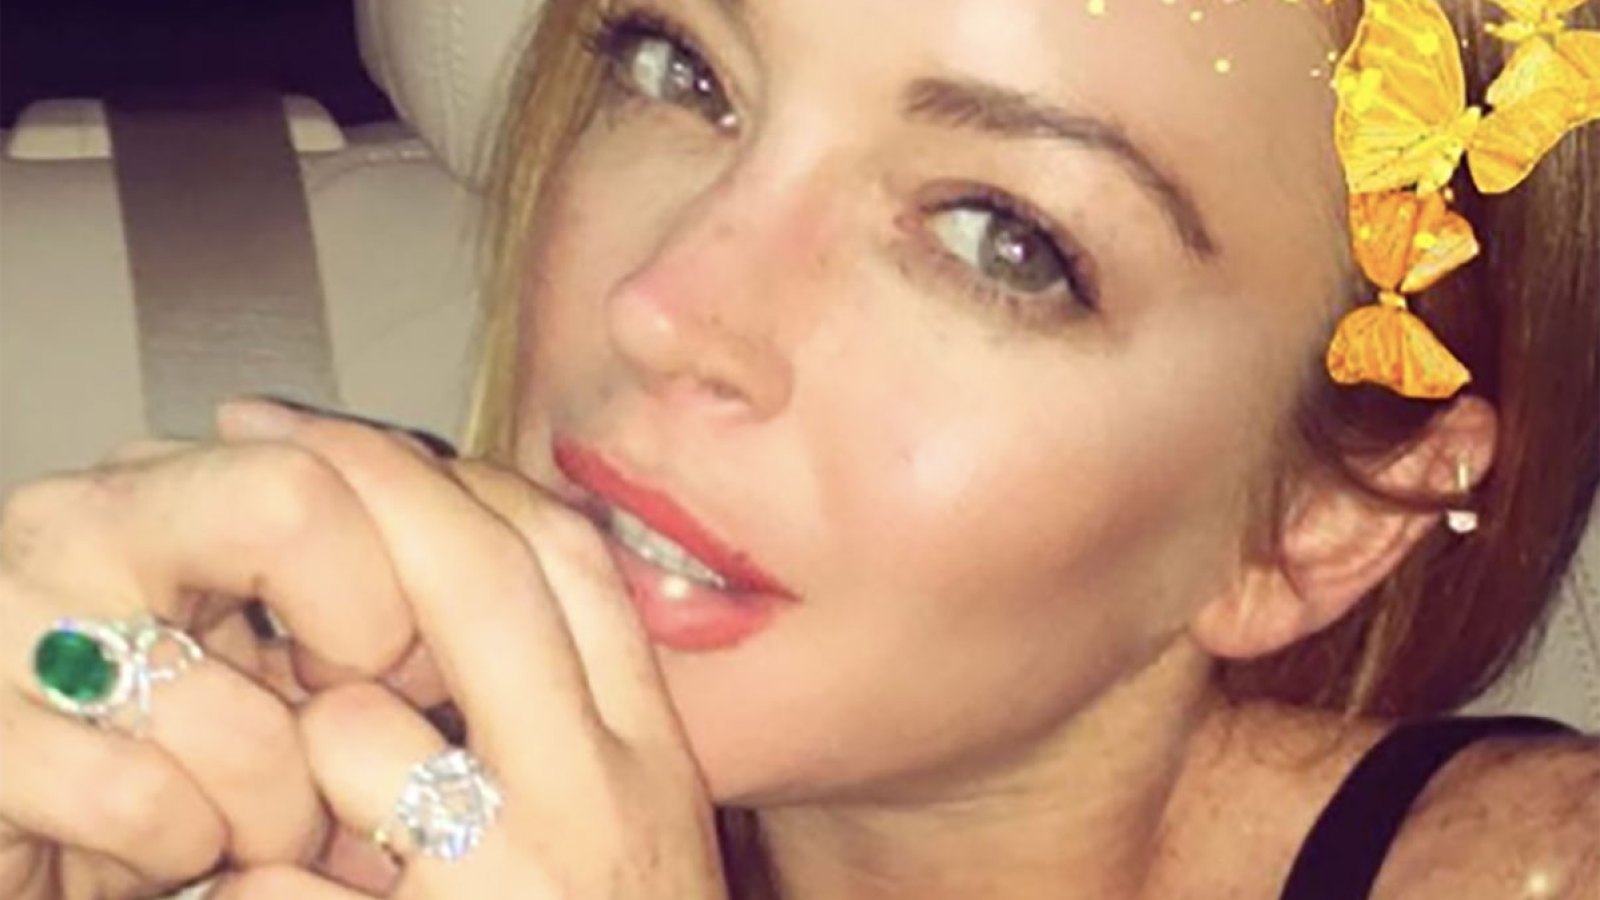 Lindsay Lohan Shows Off Her Engagement Ring After Cheating Scandal